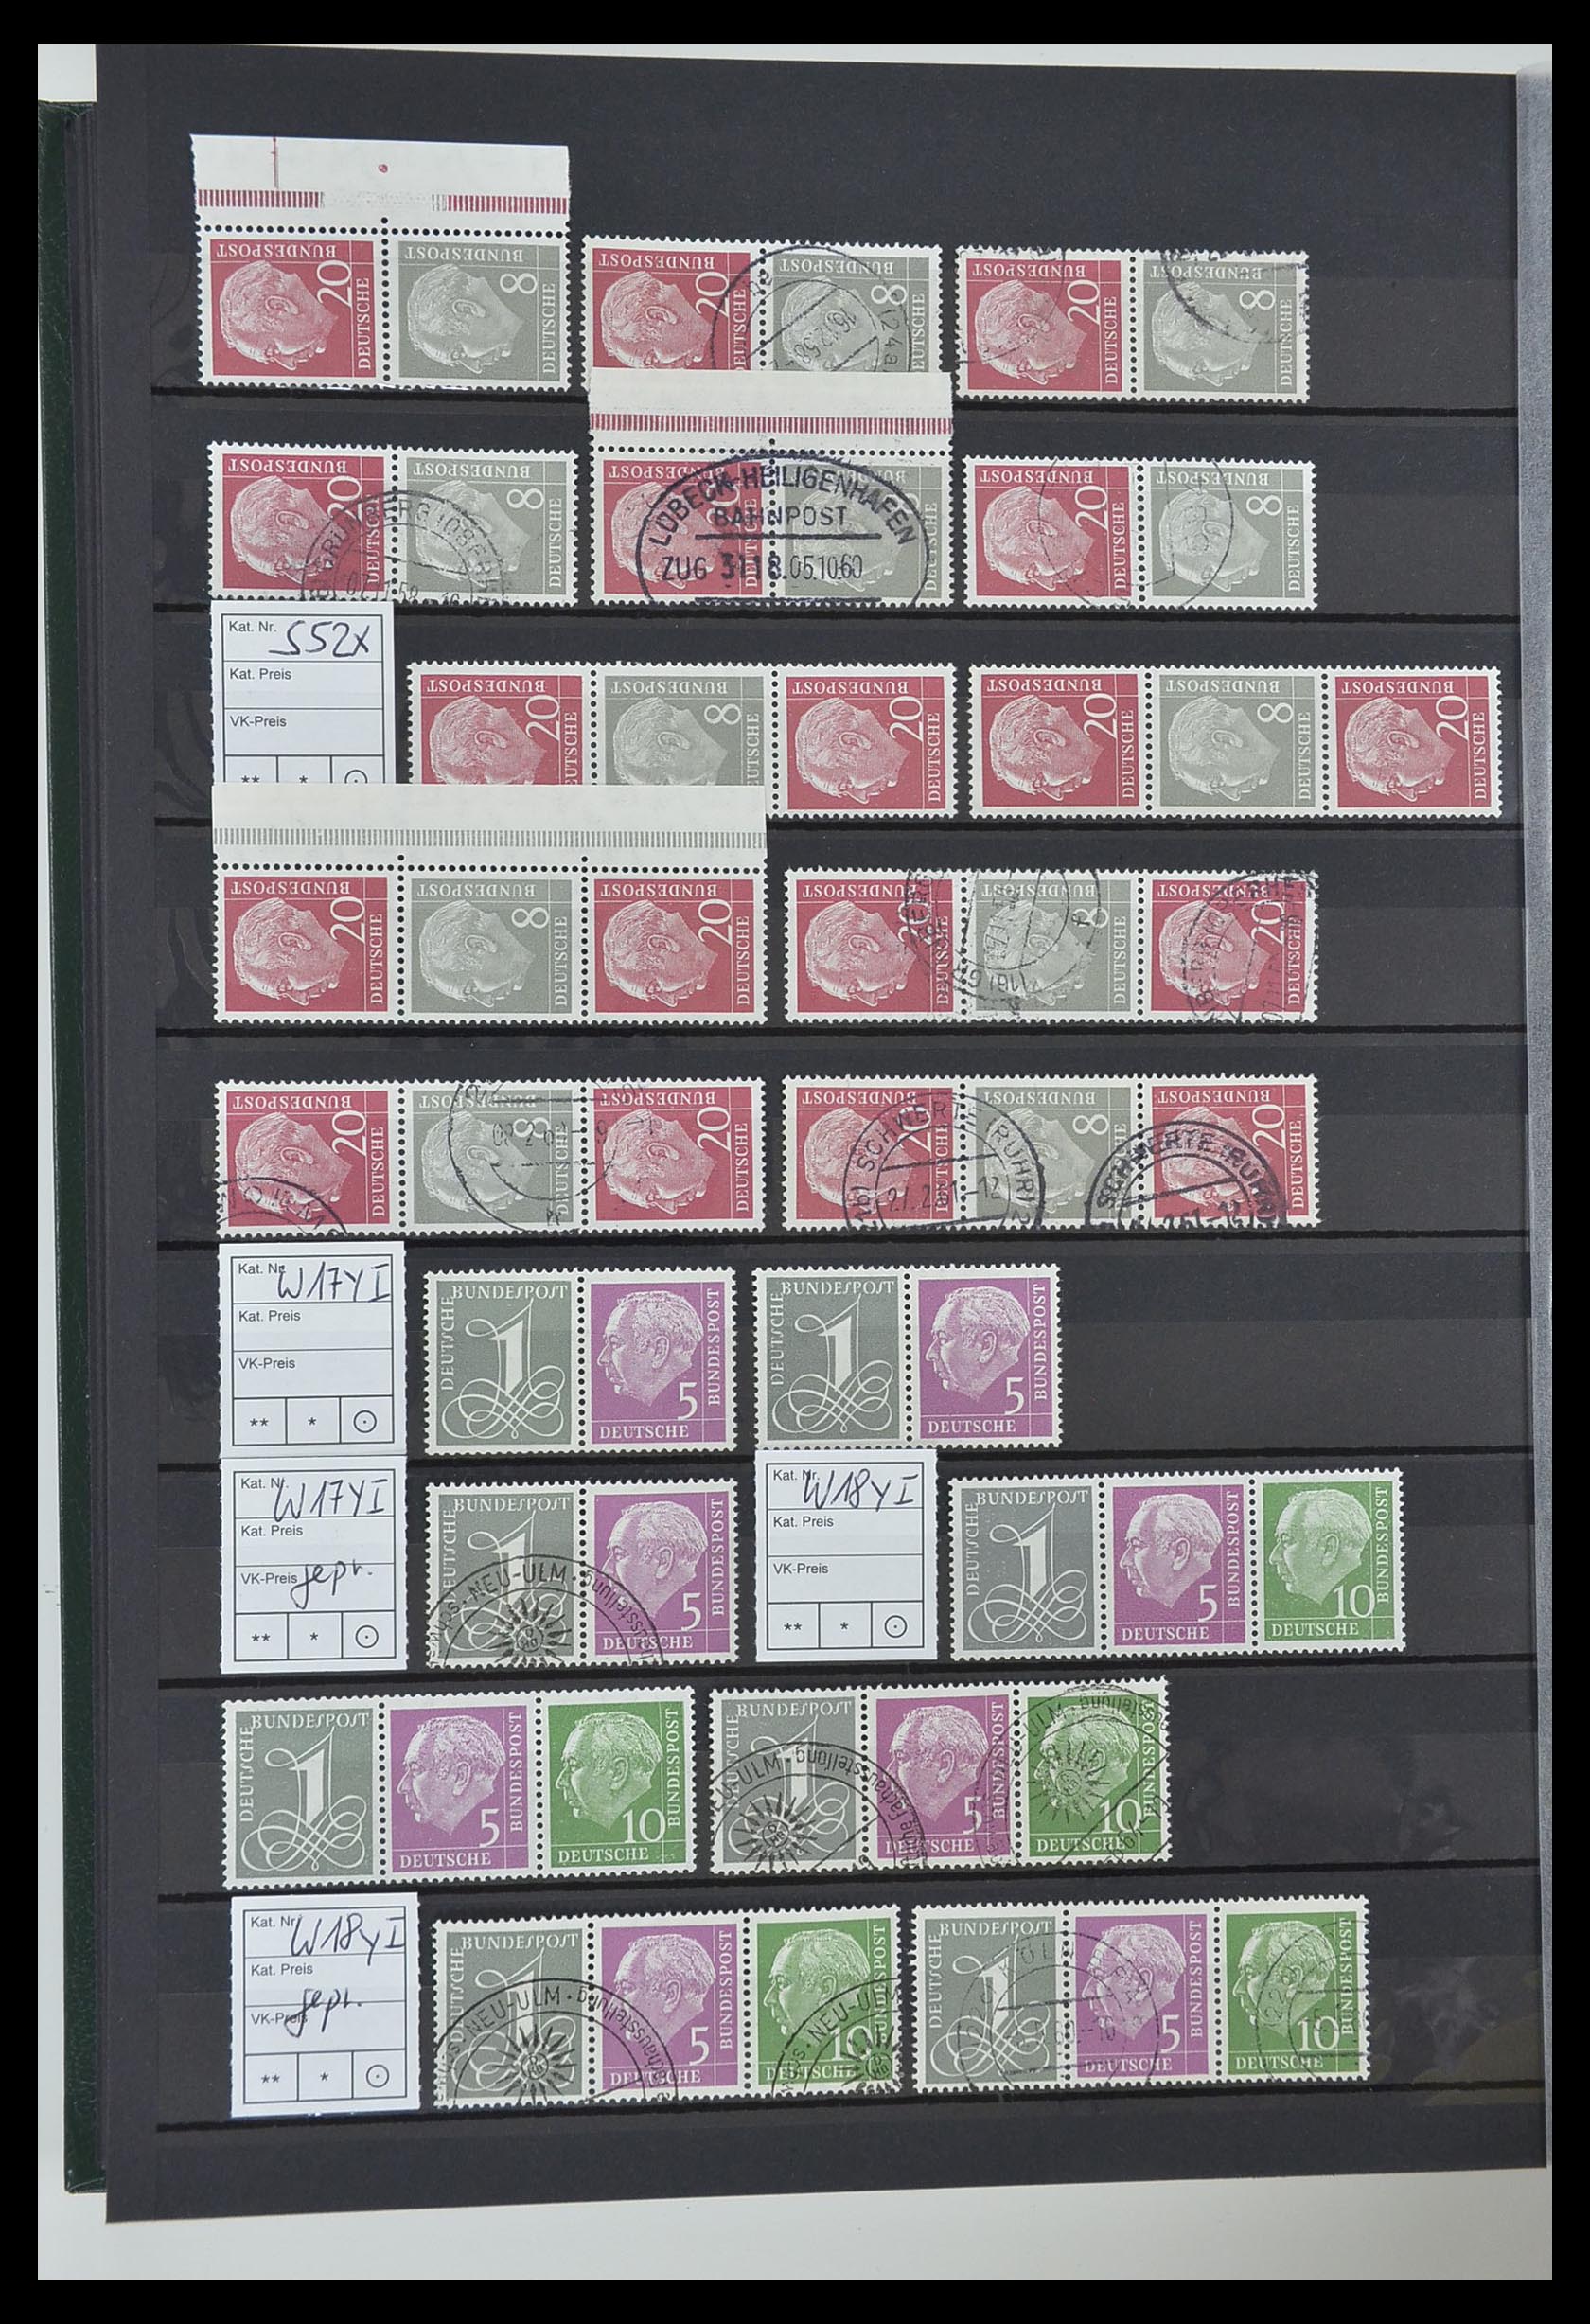 33275 024 - Stamp collection 33275 Bundespost combinations 1951-1960.